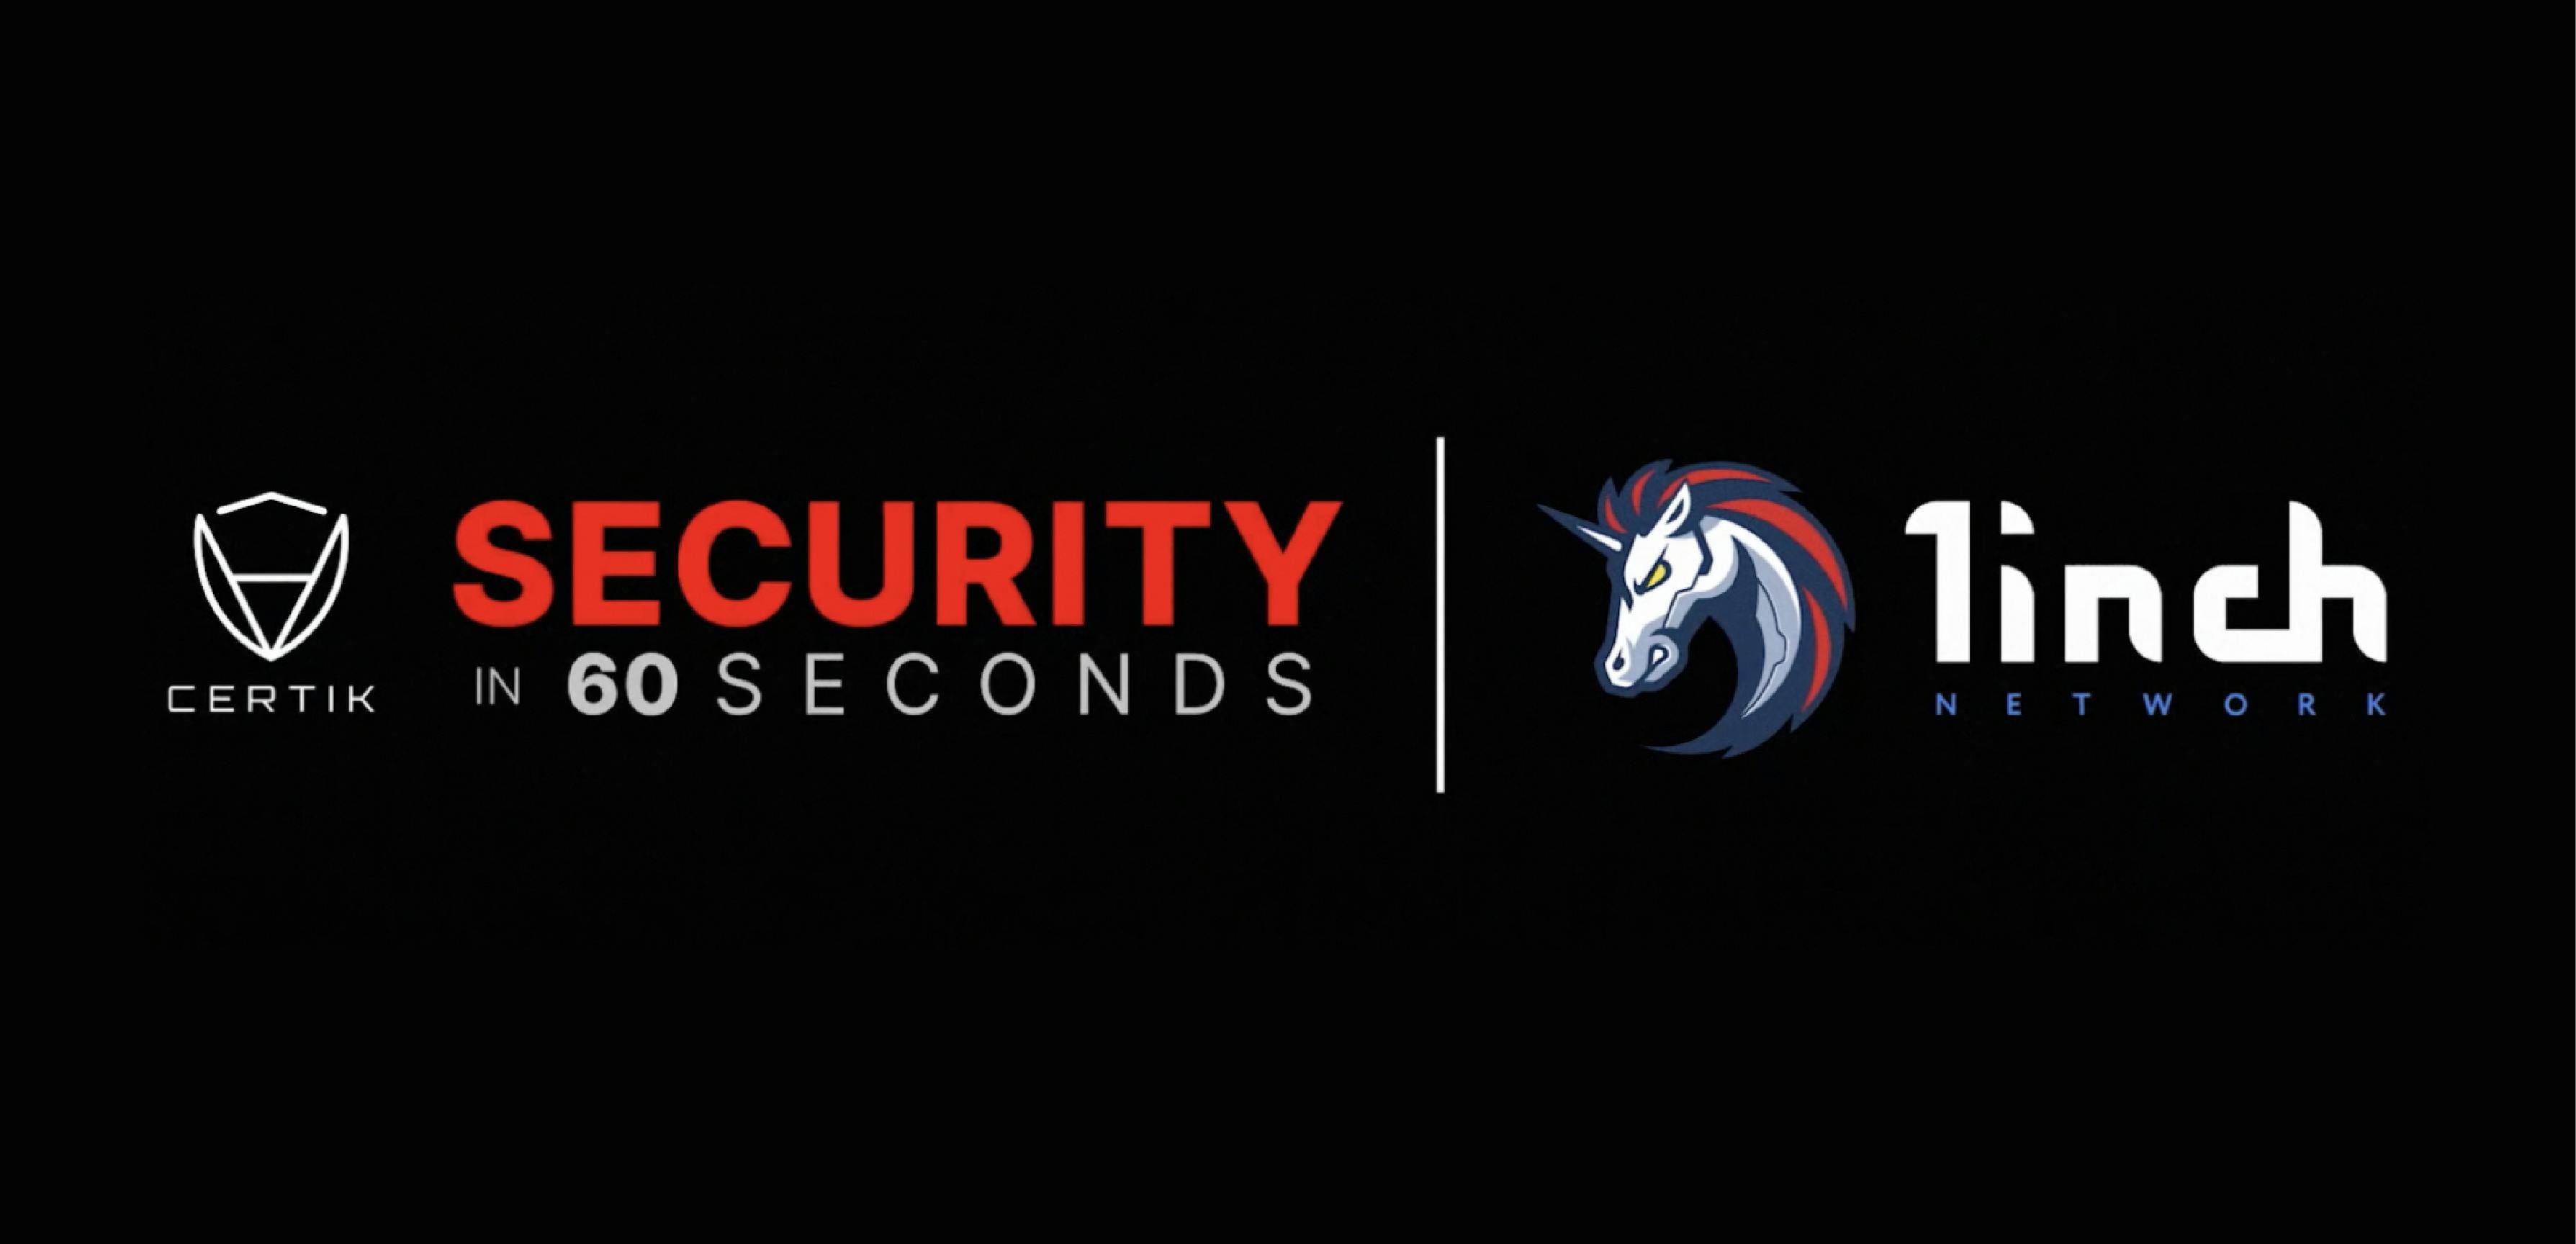 Security in 60 Seconds - 1inch Network